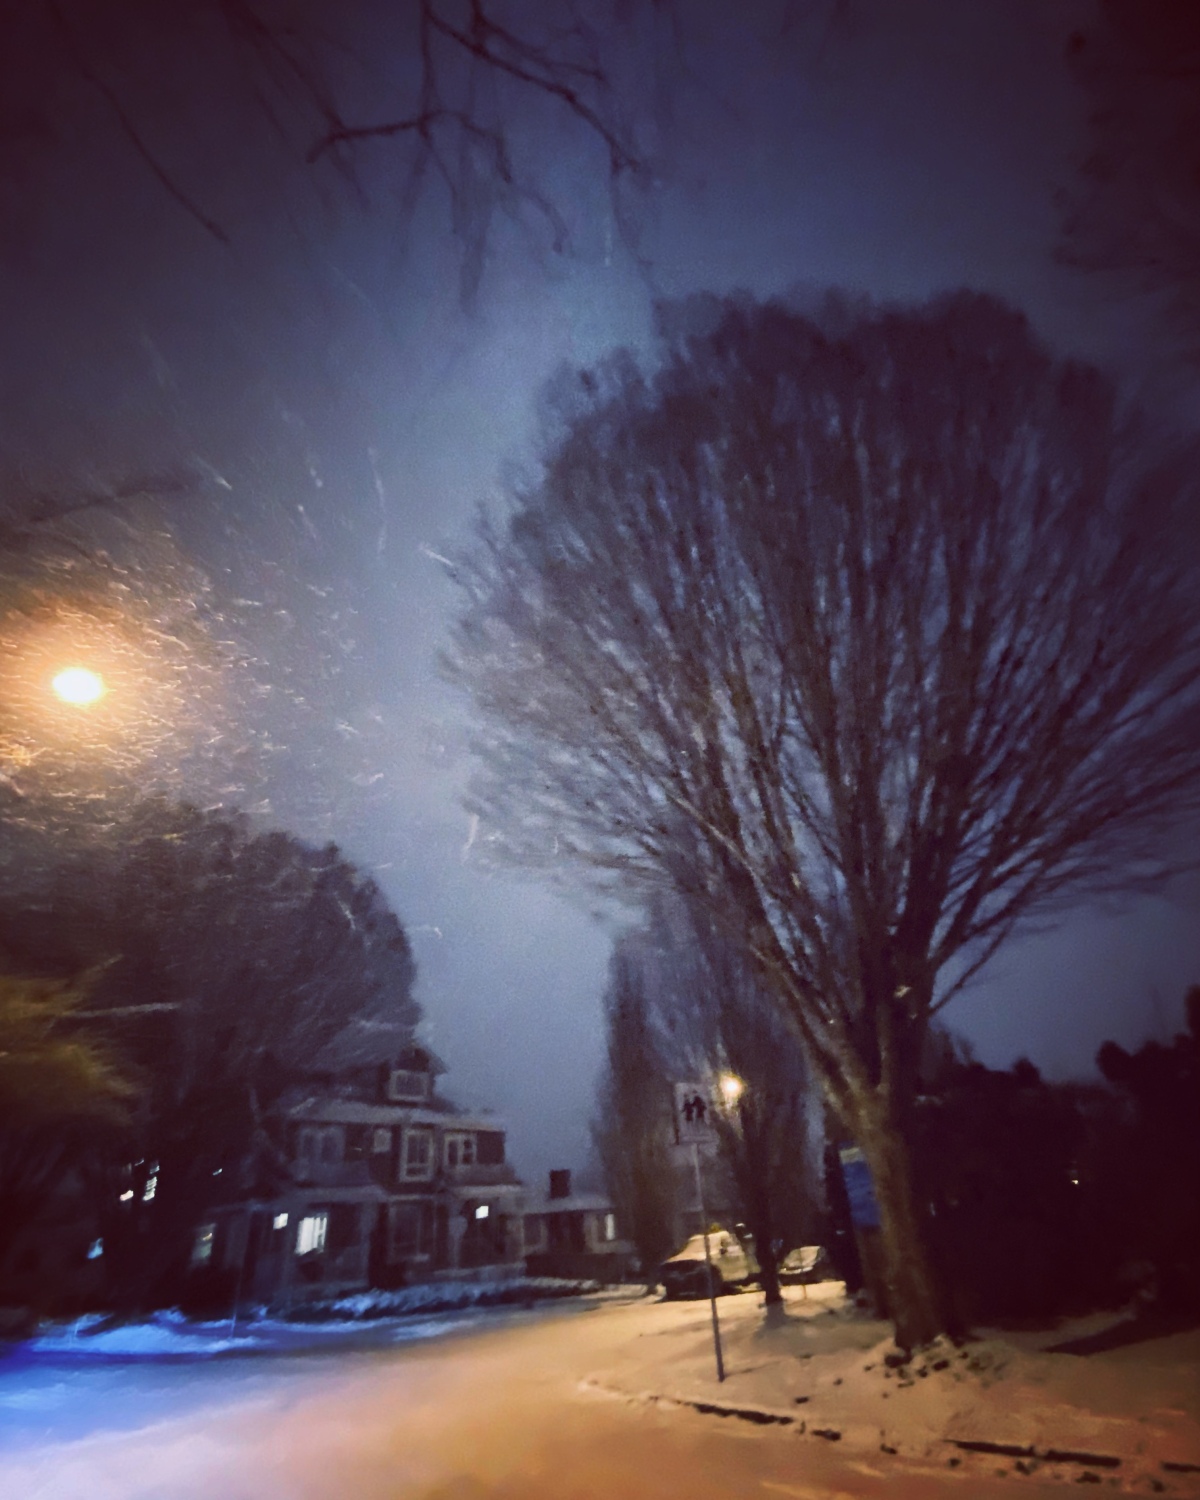 Photo Of The Day: Snowy Night